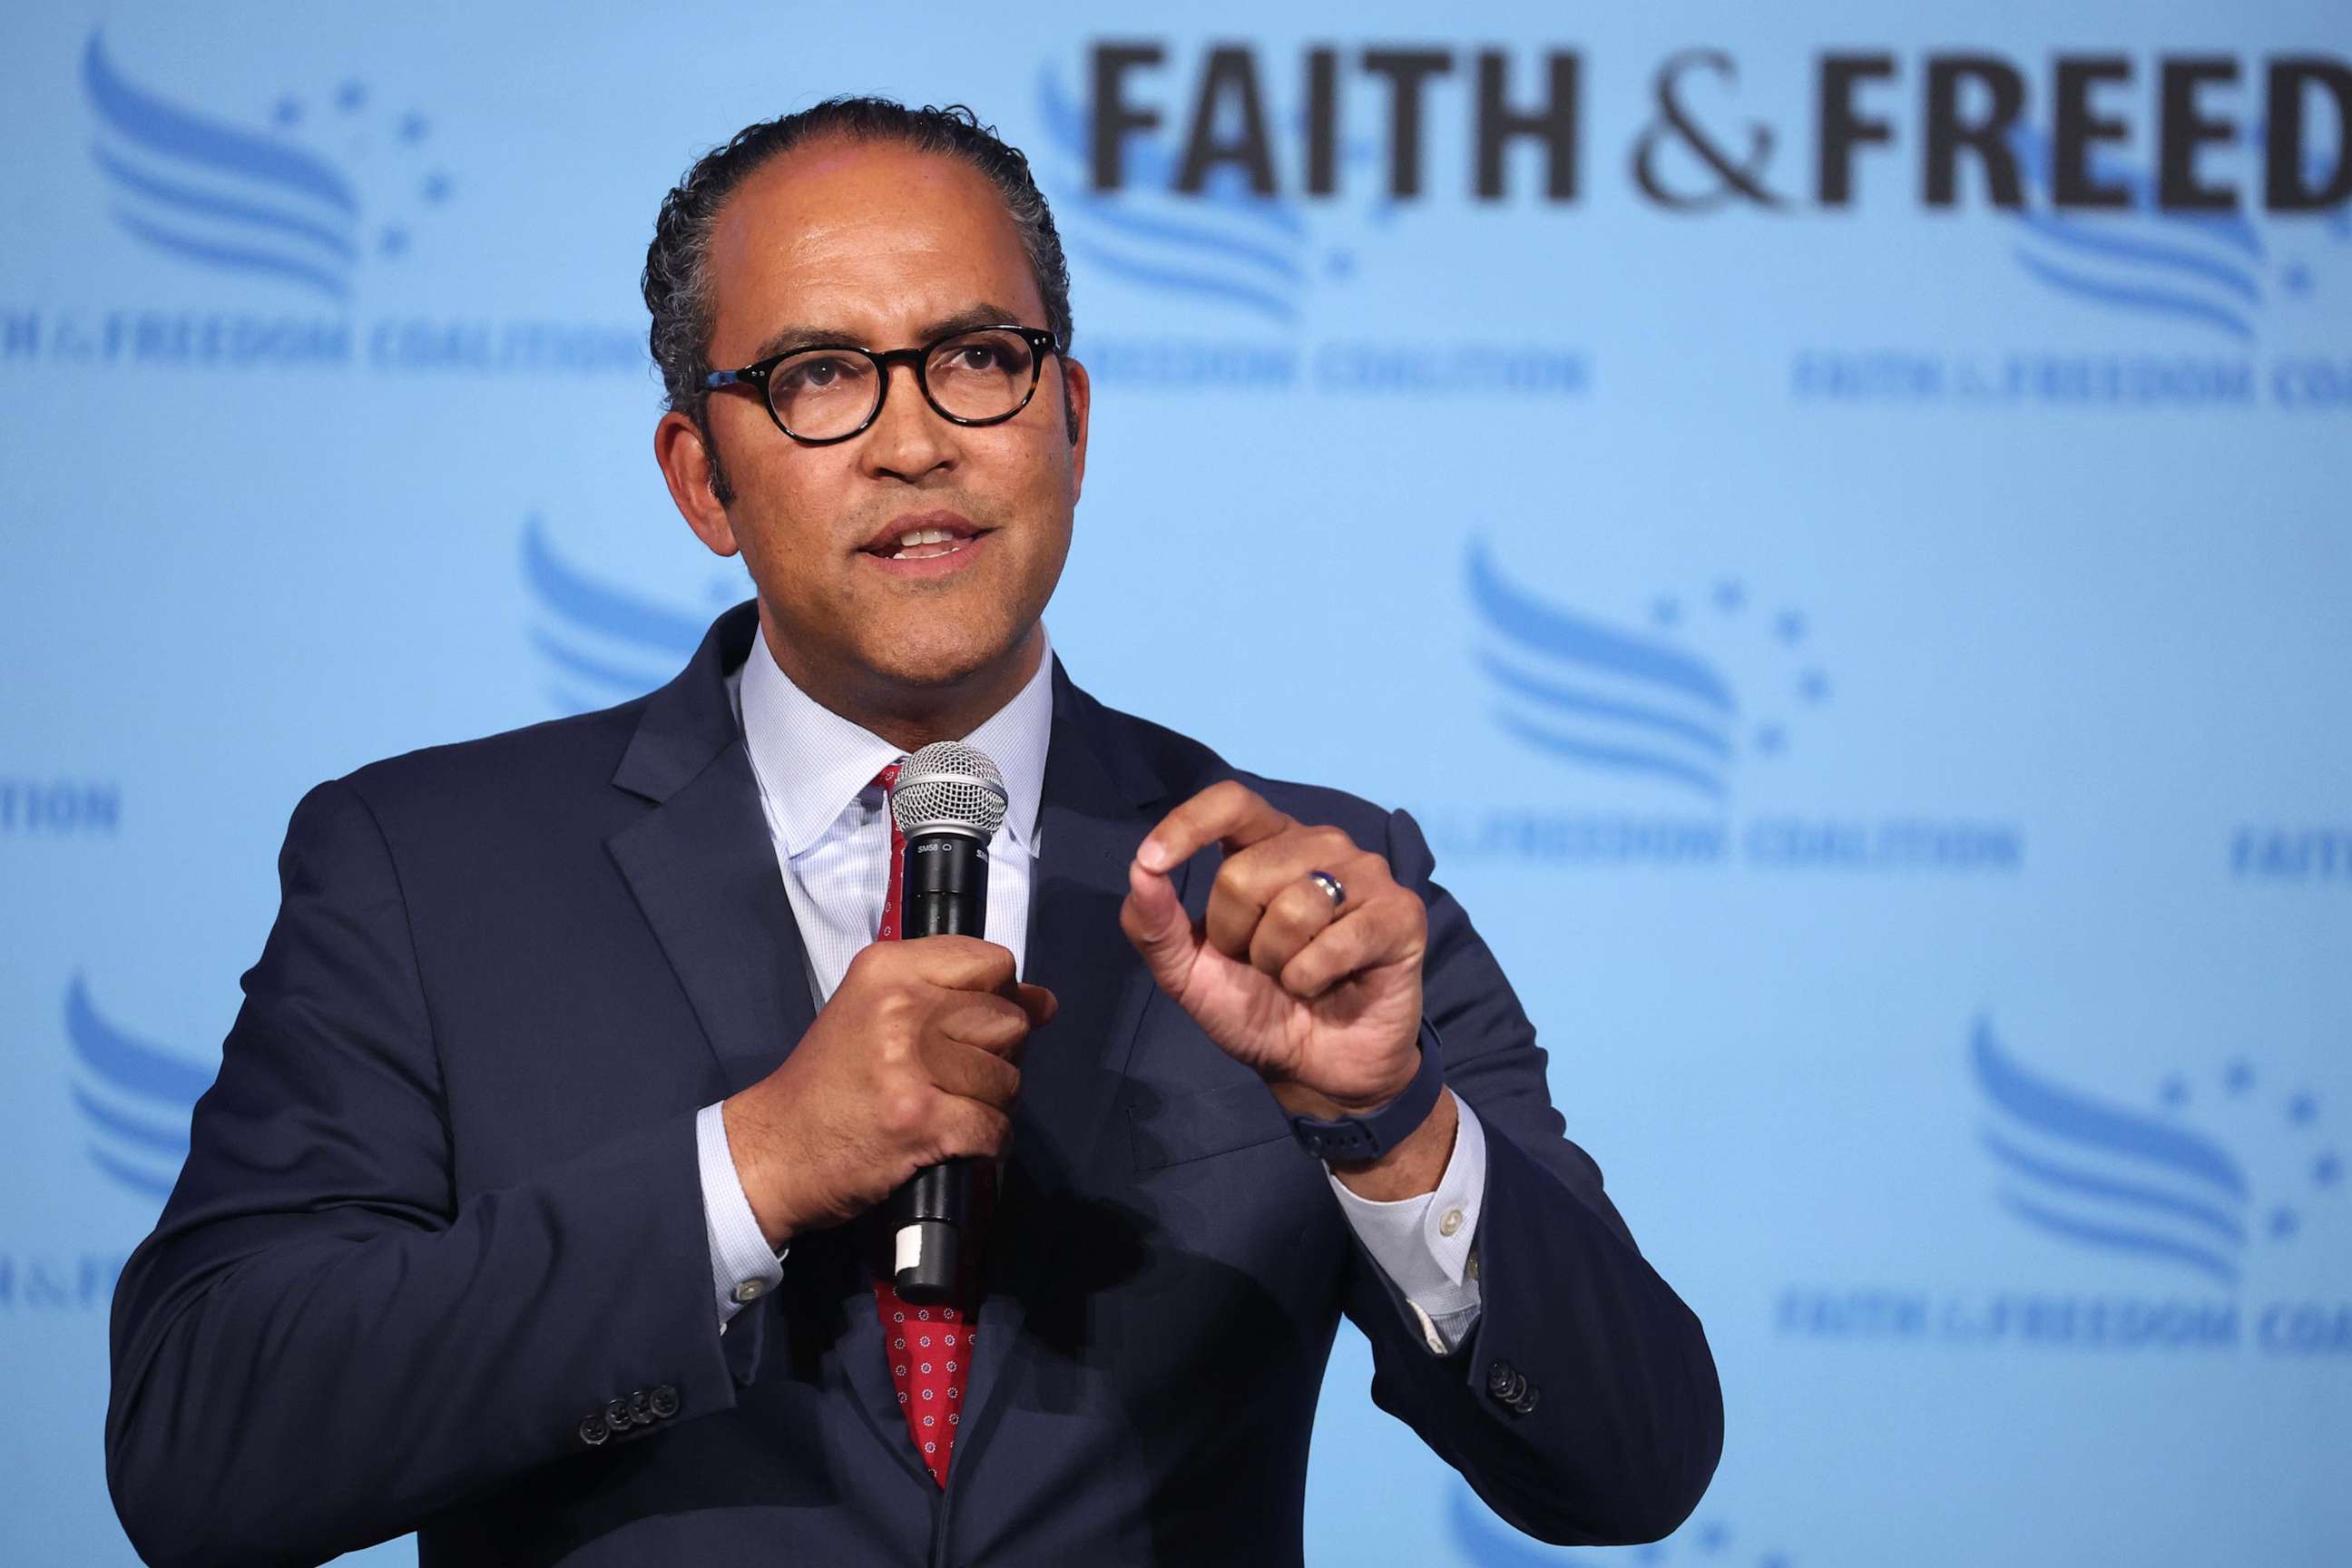 PHOTO: In this April 22, 2023, file photo, former Texas Congressman Will Hurd speaks to guests at the Iowa Faith & Freedom Coalition Spring Kick-Off, in Clive, Iowa.